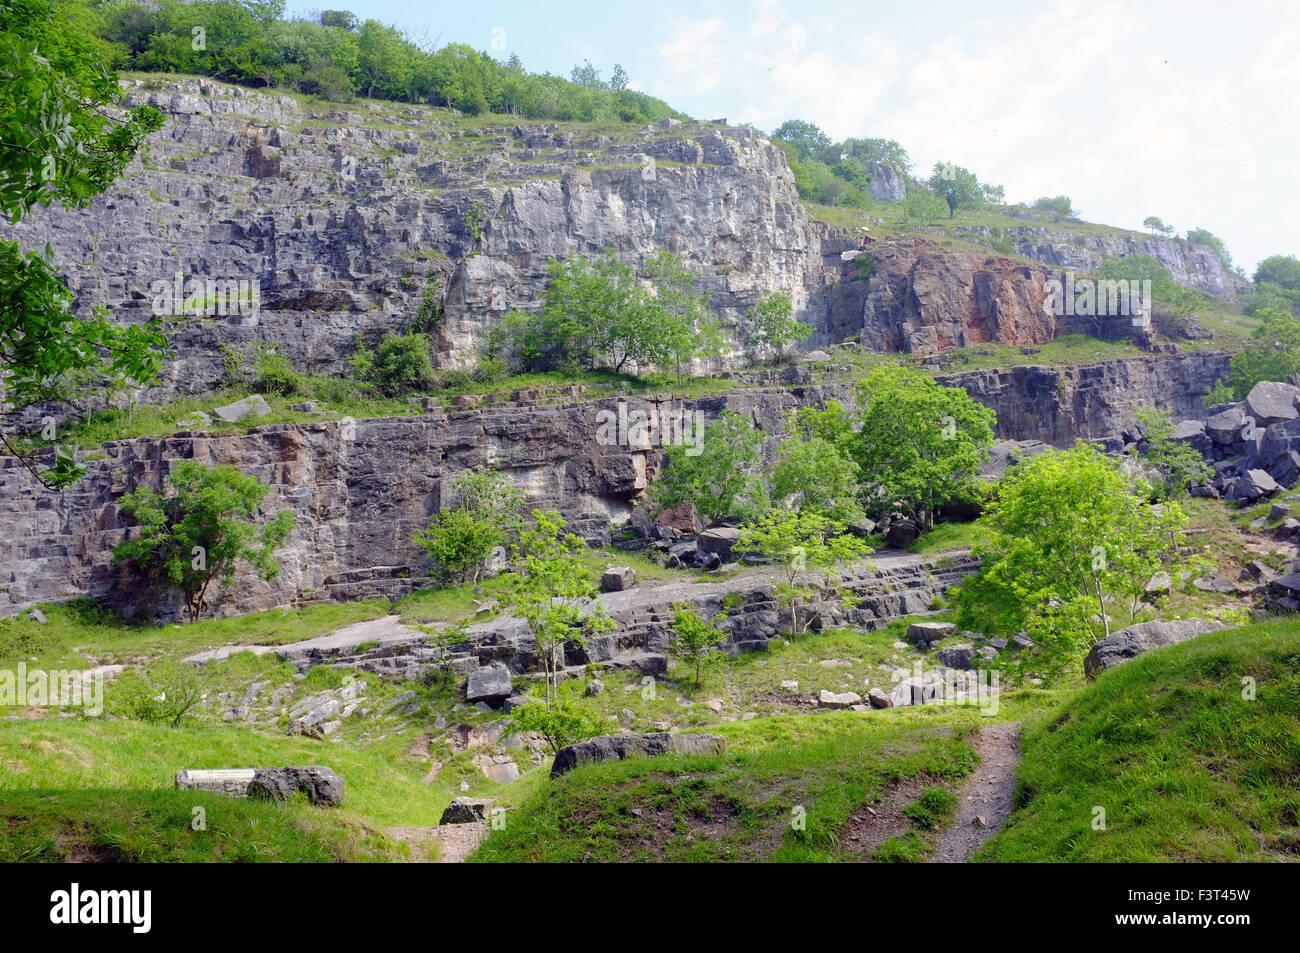 The limestone Cheddar Gorge in the Mendip Hills near the village of Cheddar in Somerset. Stock Photo